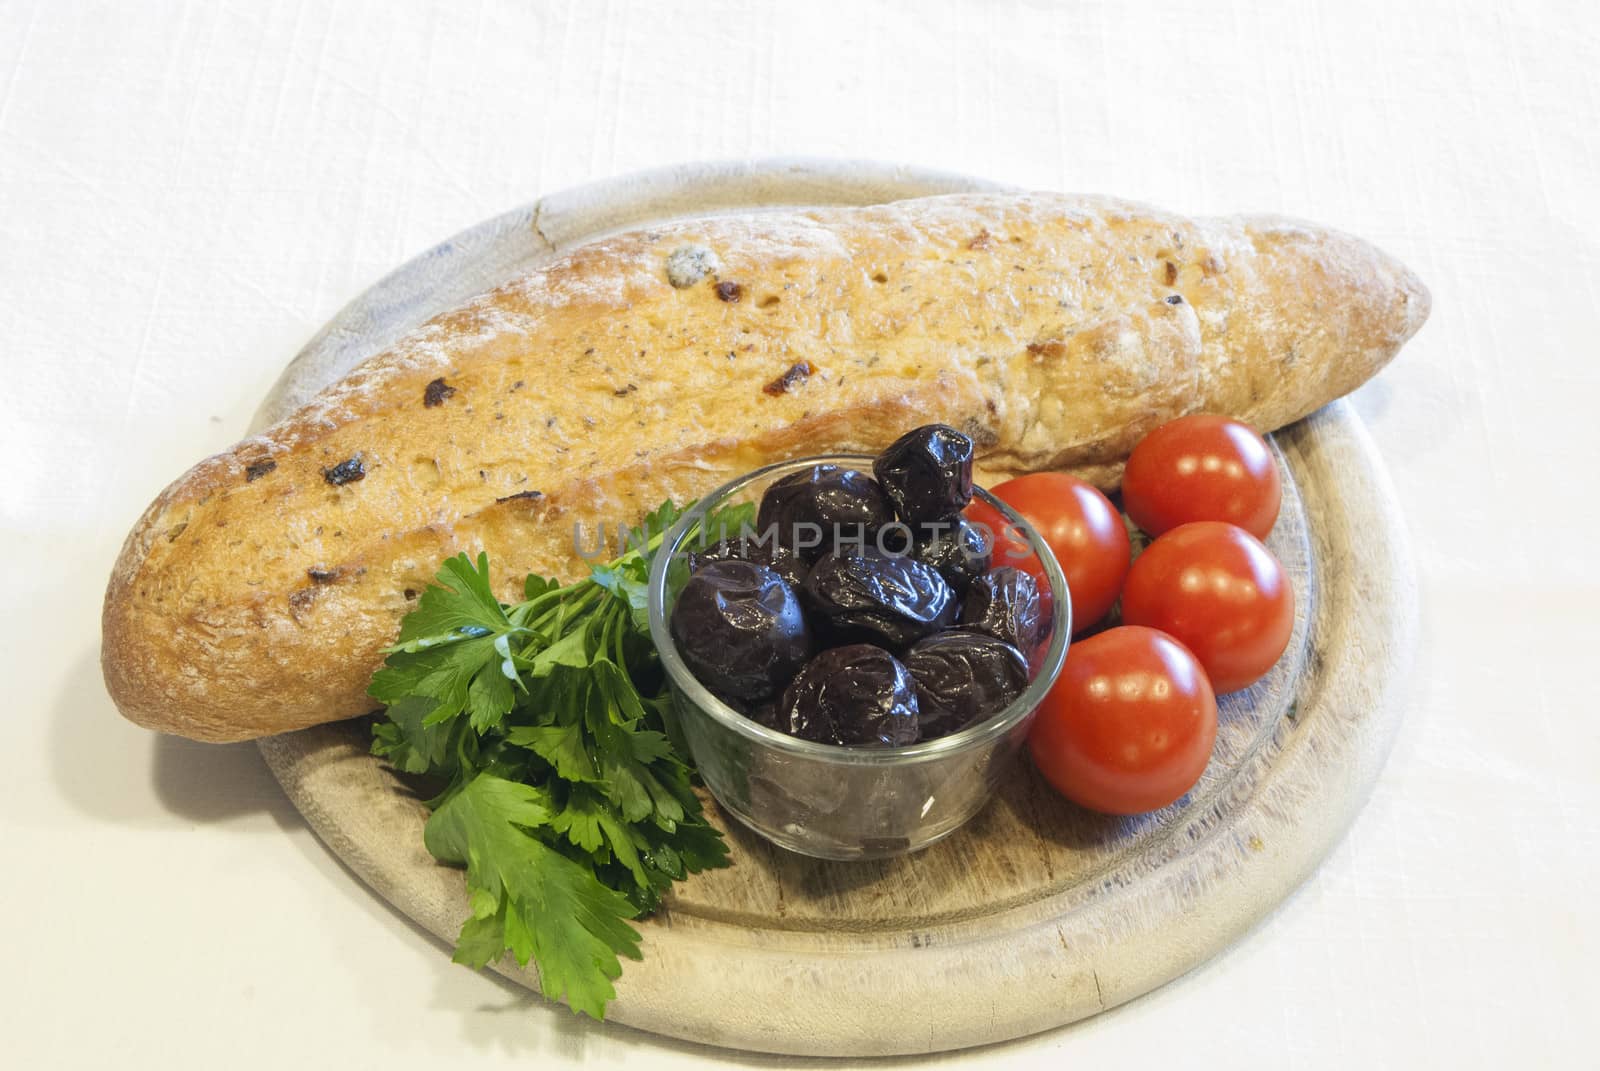 Homemade organic baguette bread with olives, cherry tomatoes and parsley